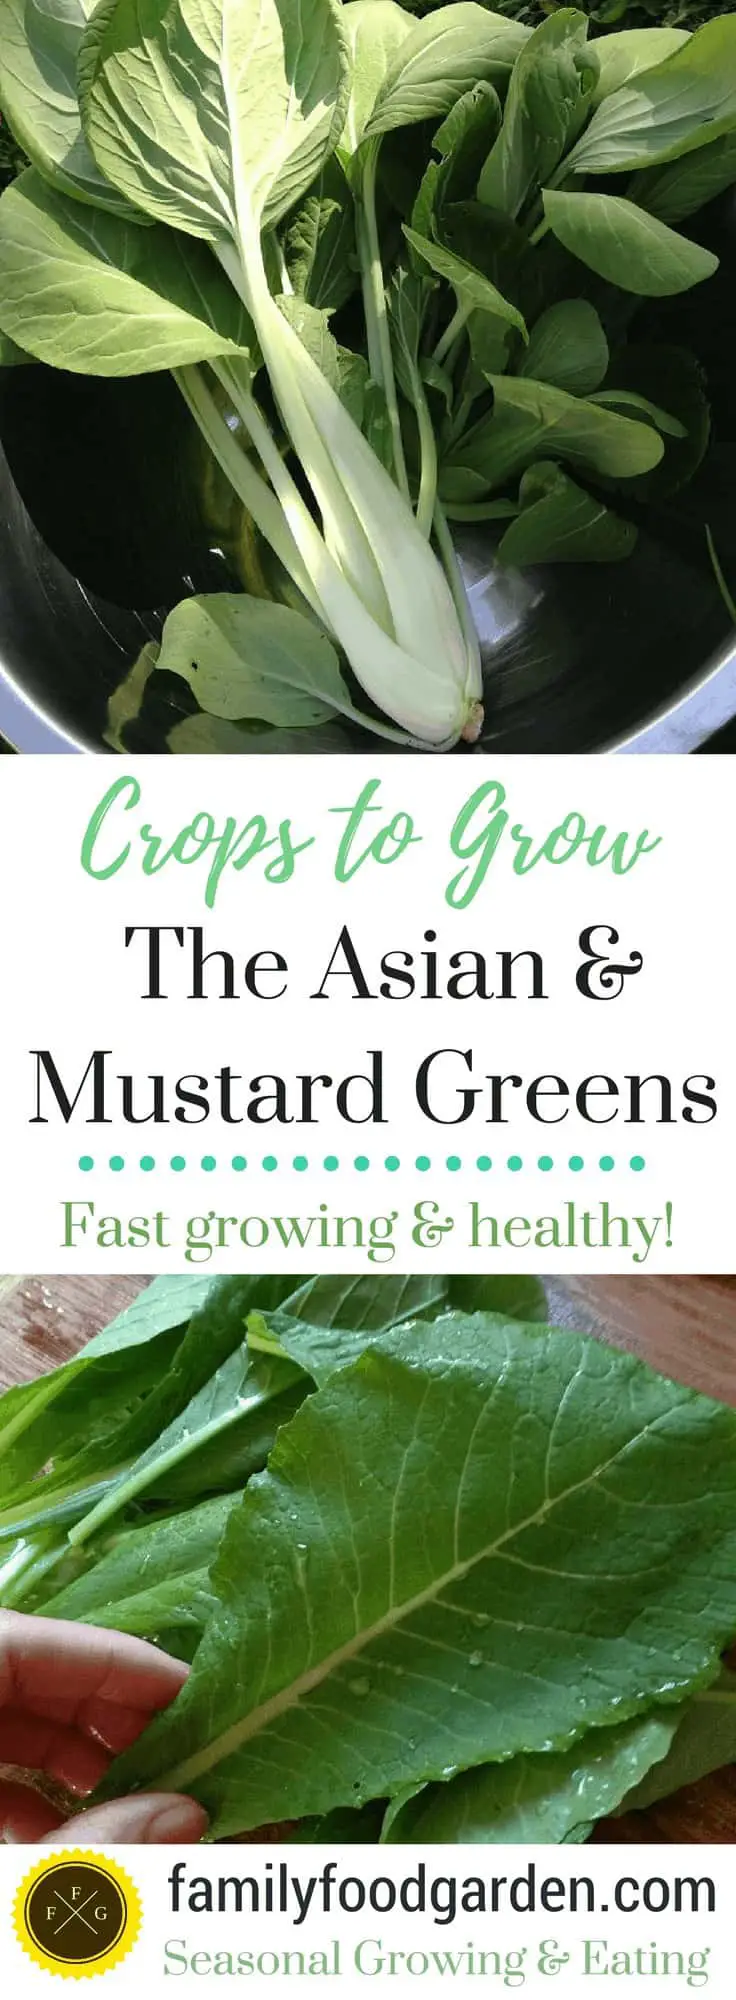 Crops To Grow: The Asian & Mustard Greens